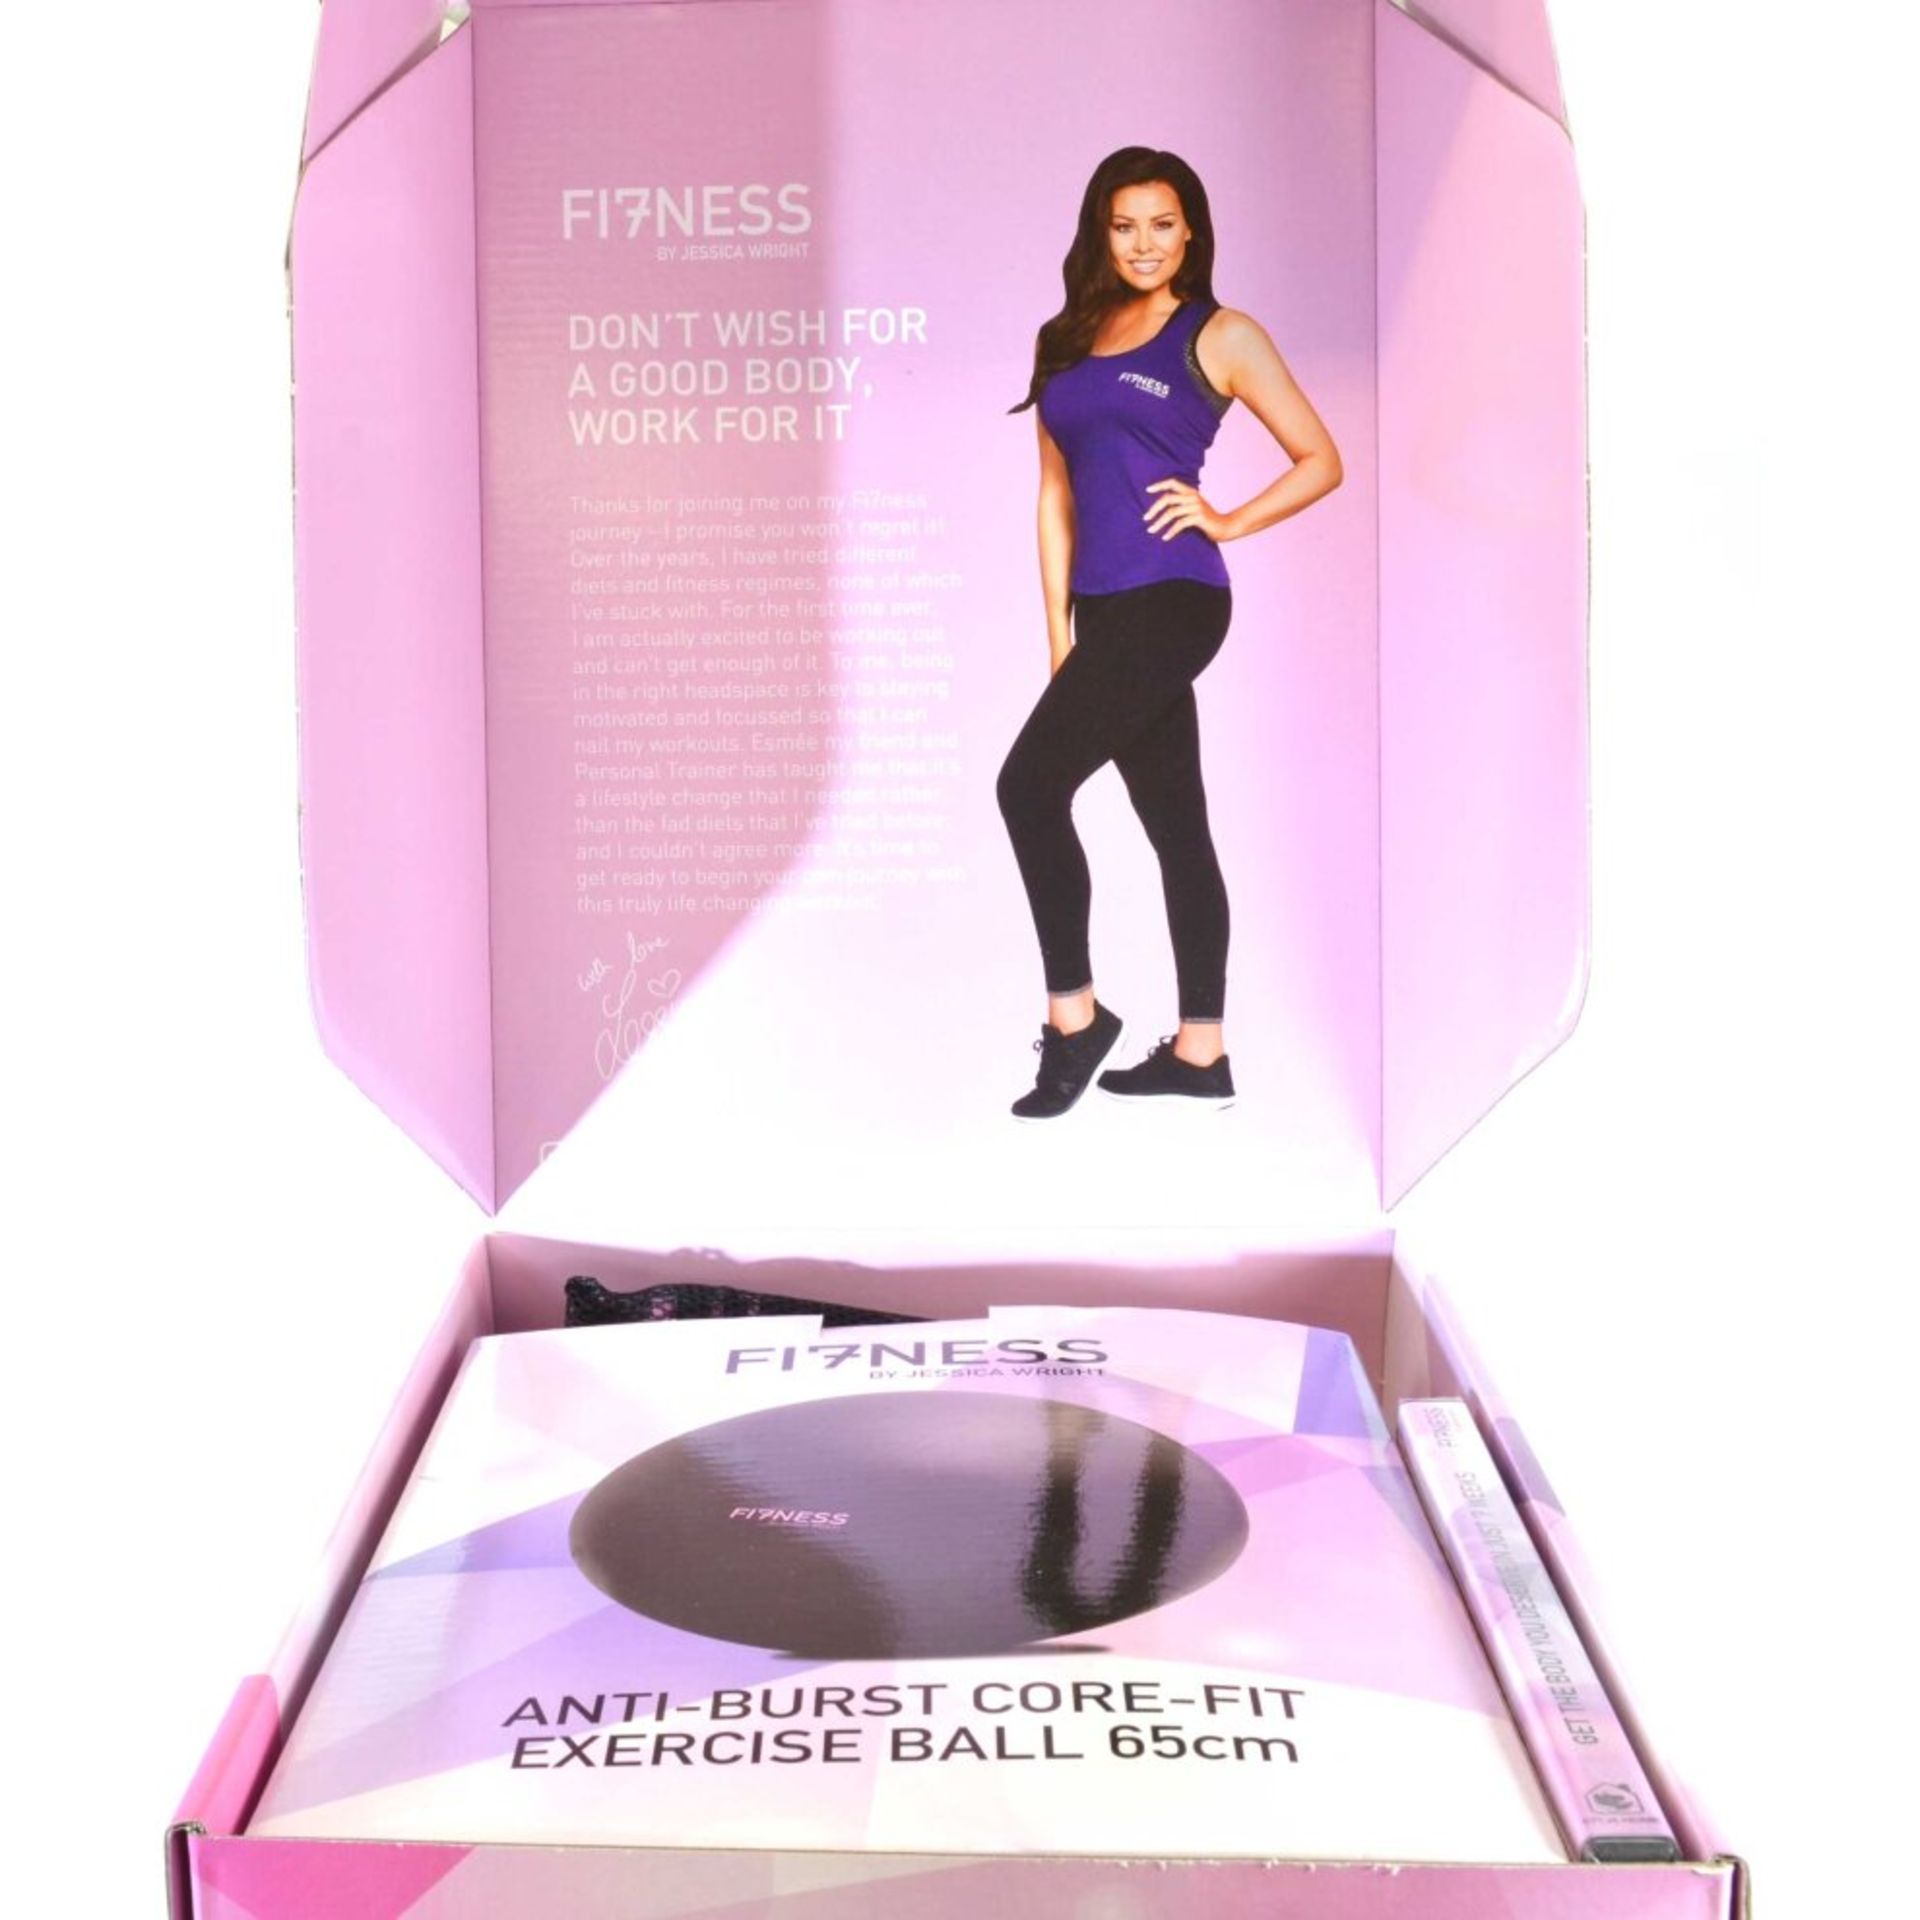 RRP £17.99 each - 10 x Fi7ness by Jessica Wright Complete 7 Week At Home Fitness Workout Programme